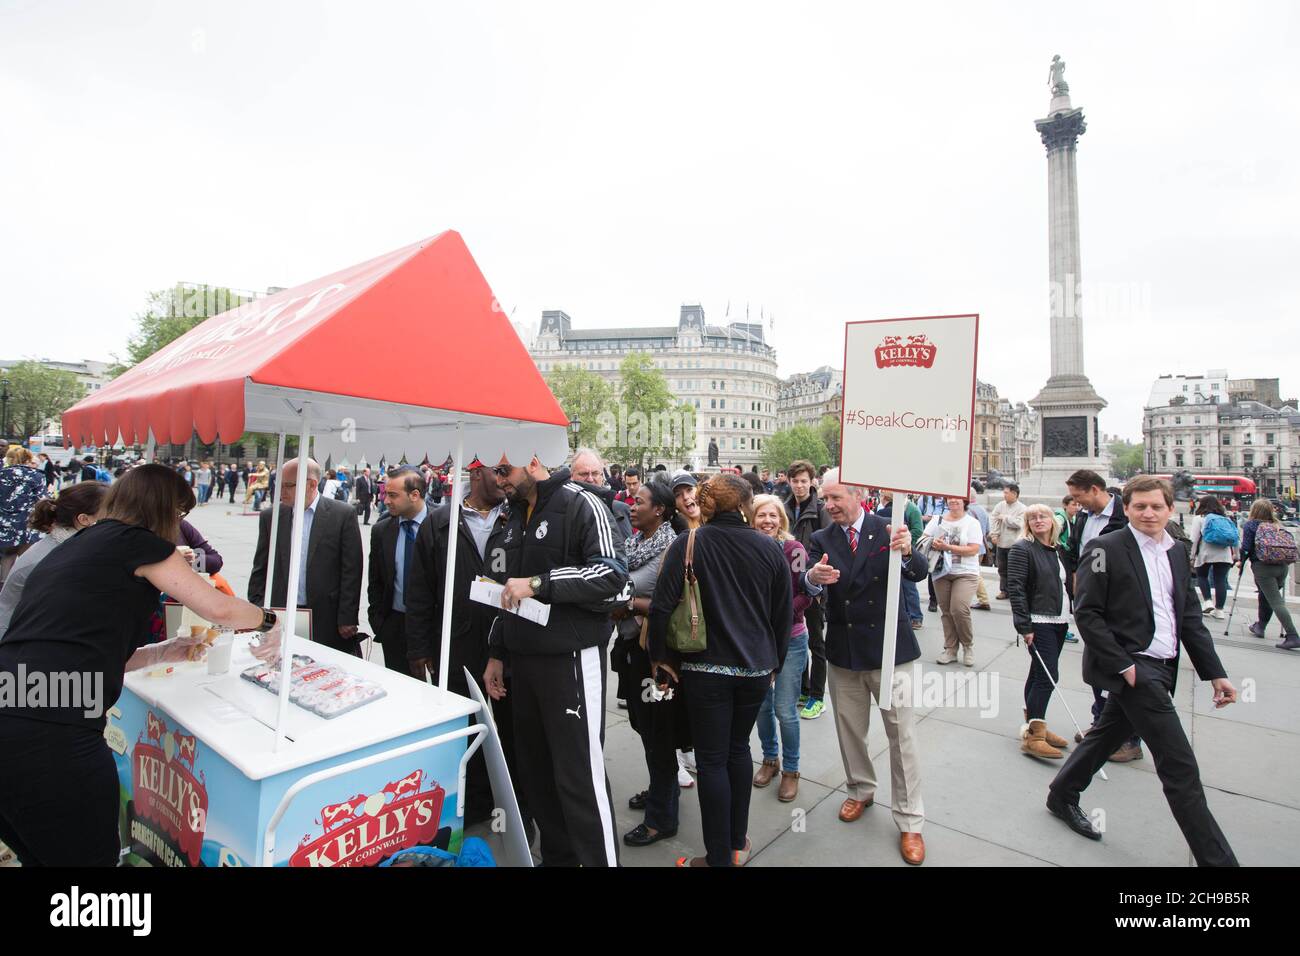 Members of the public queue for Kellys of Cornwall ice cream in Trafalgar Square in London, as protestors raise awareness of the Cornish language following the recent Government funding cuts. Stock Photo